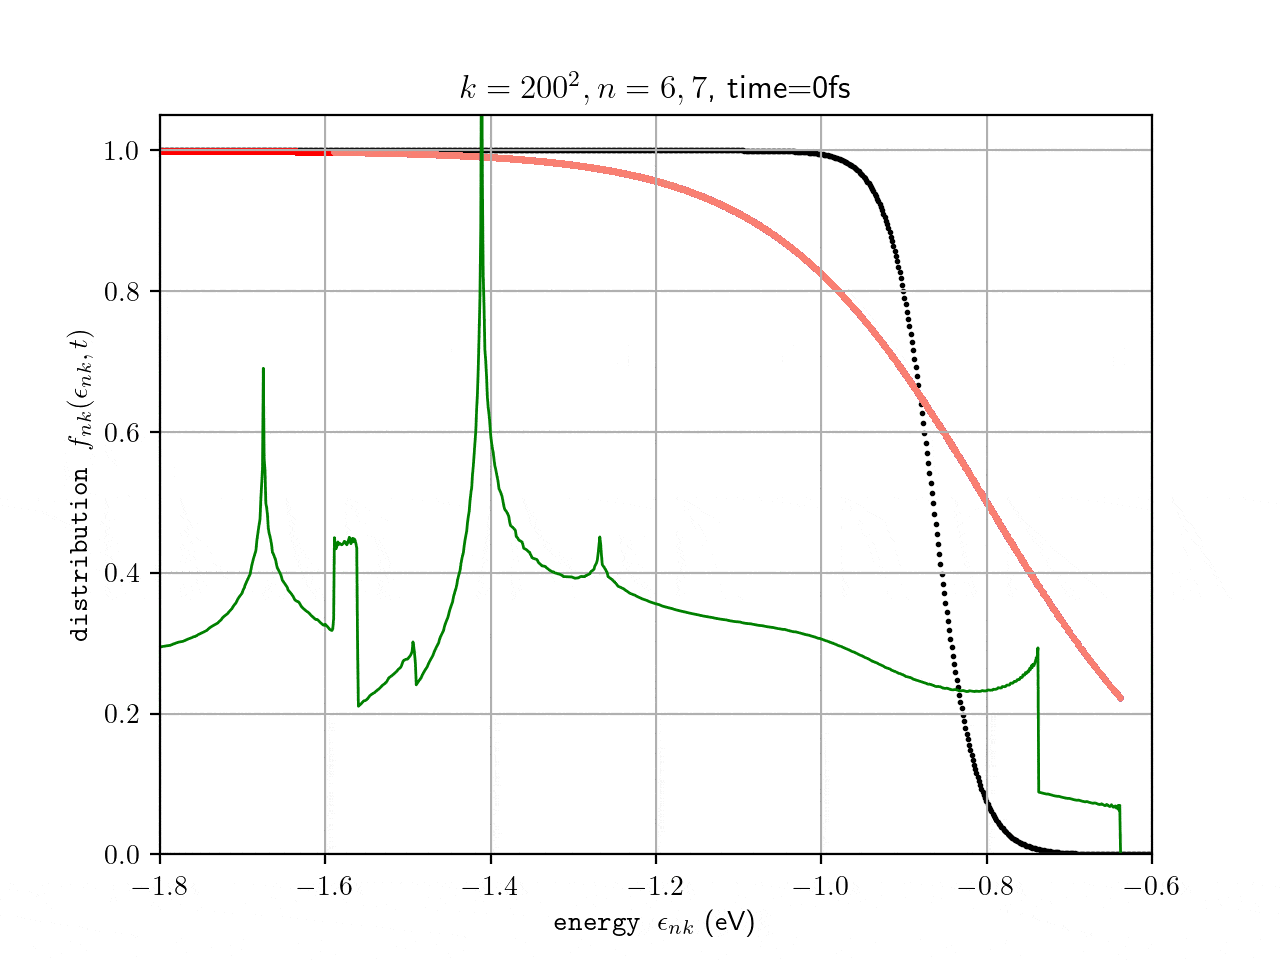 Ultrafafast carrier relaxation of thermally excited valence band electrons in MoS2 (here wo SOC) - the initial temperature of the distribution function is set to 1500K (blue), the final temperature to 300K (black). The 



calculated time-







dependent ab initio carrier distribution is given in red. For comparison the density of states is shown in green. The energetically isolated valence bands starts at around E=-0.65eV. Further states contributing to scattering 



events start at around E=-0.72eV. The dynamics nicely show that most states relax to equilibrium within approximately 200fs, while the states close to the band edge relax significantly slower due to reduced scattering 

with 



phonons.